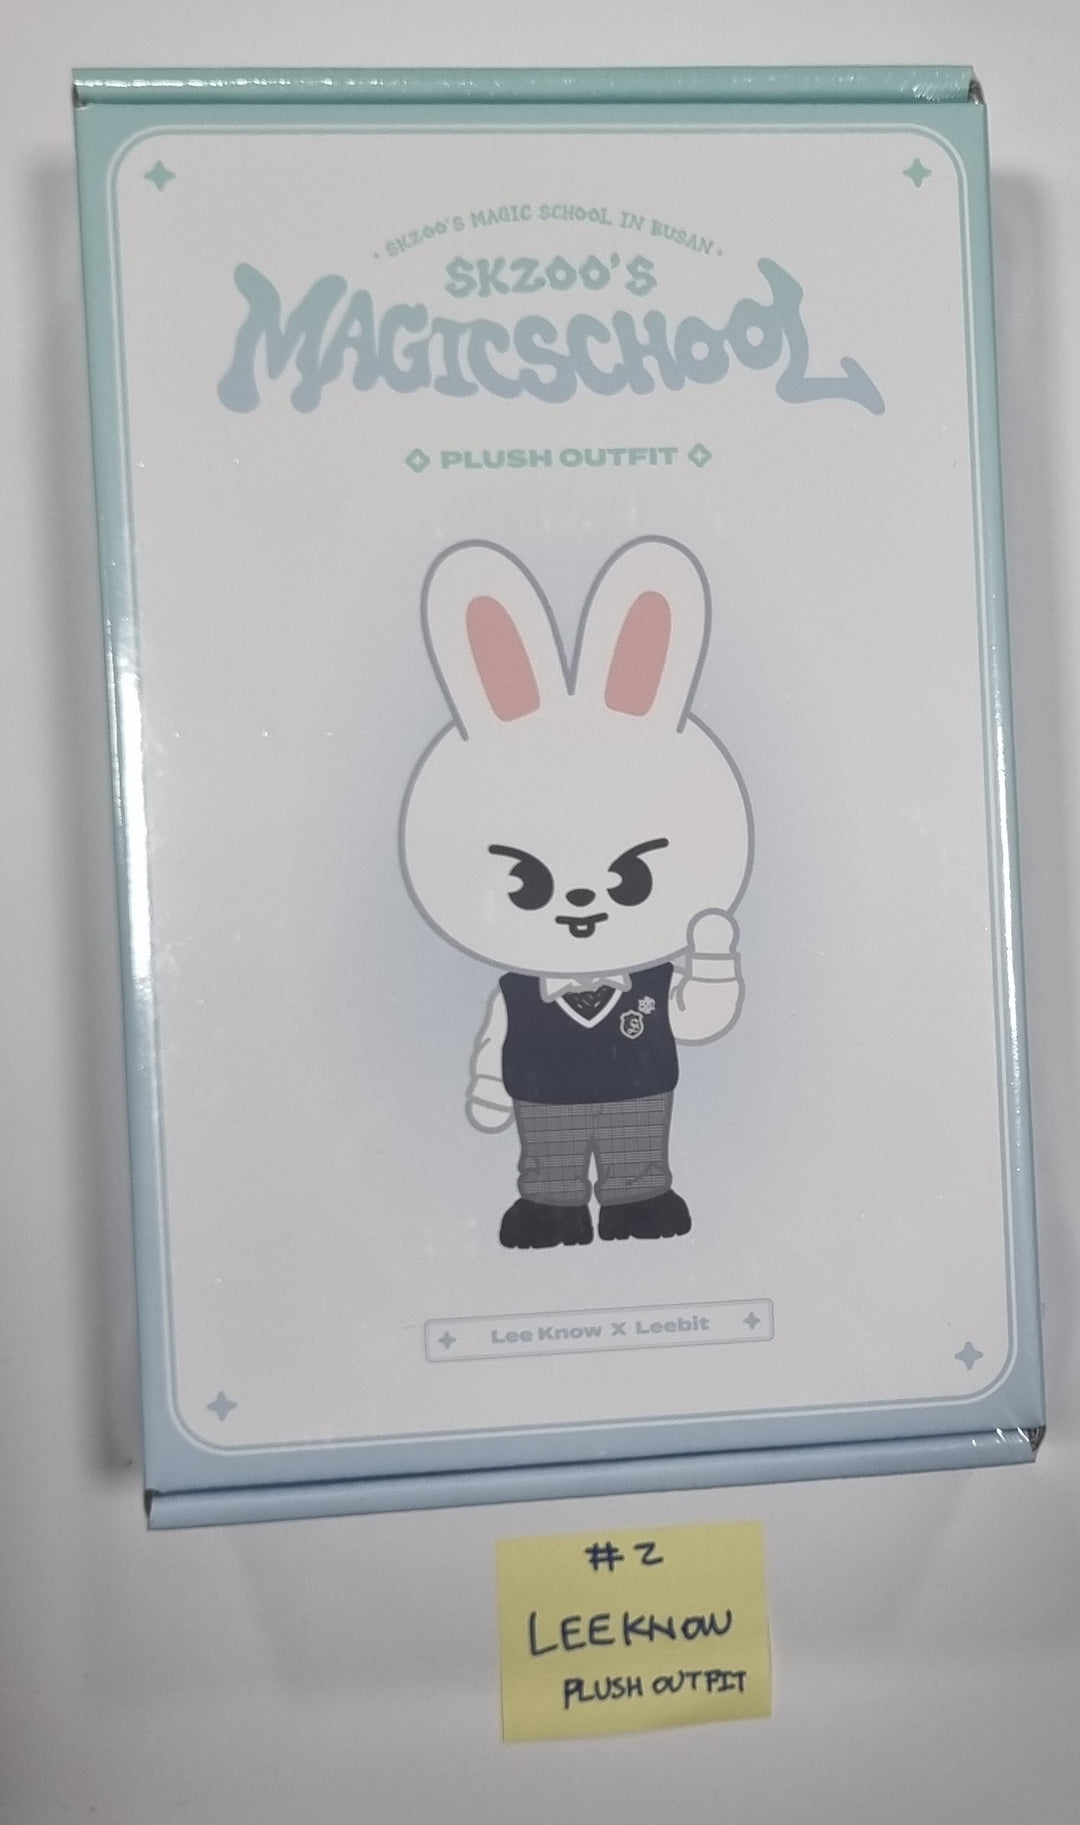 Stray Kids "MagicSchool" IN BUSAN - Official MD [PLUSH OUTFIT] [24.6.5]